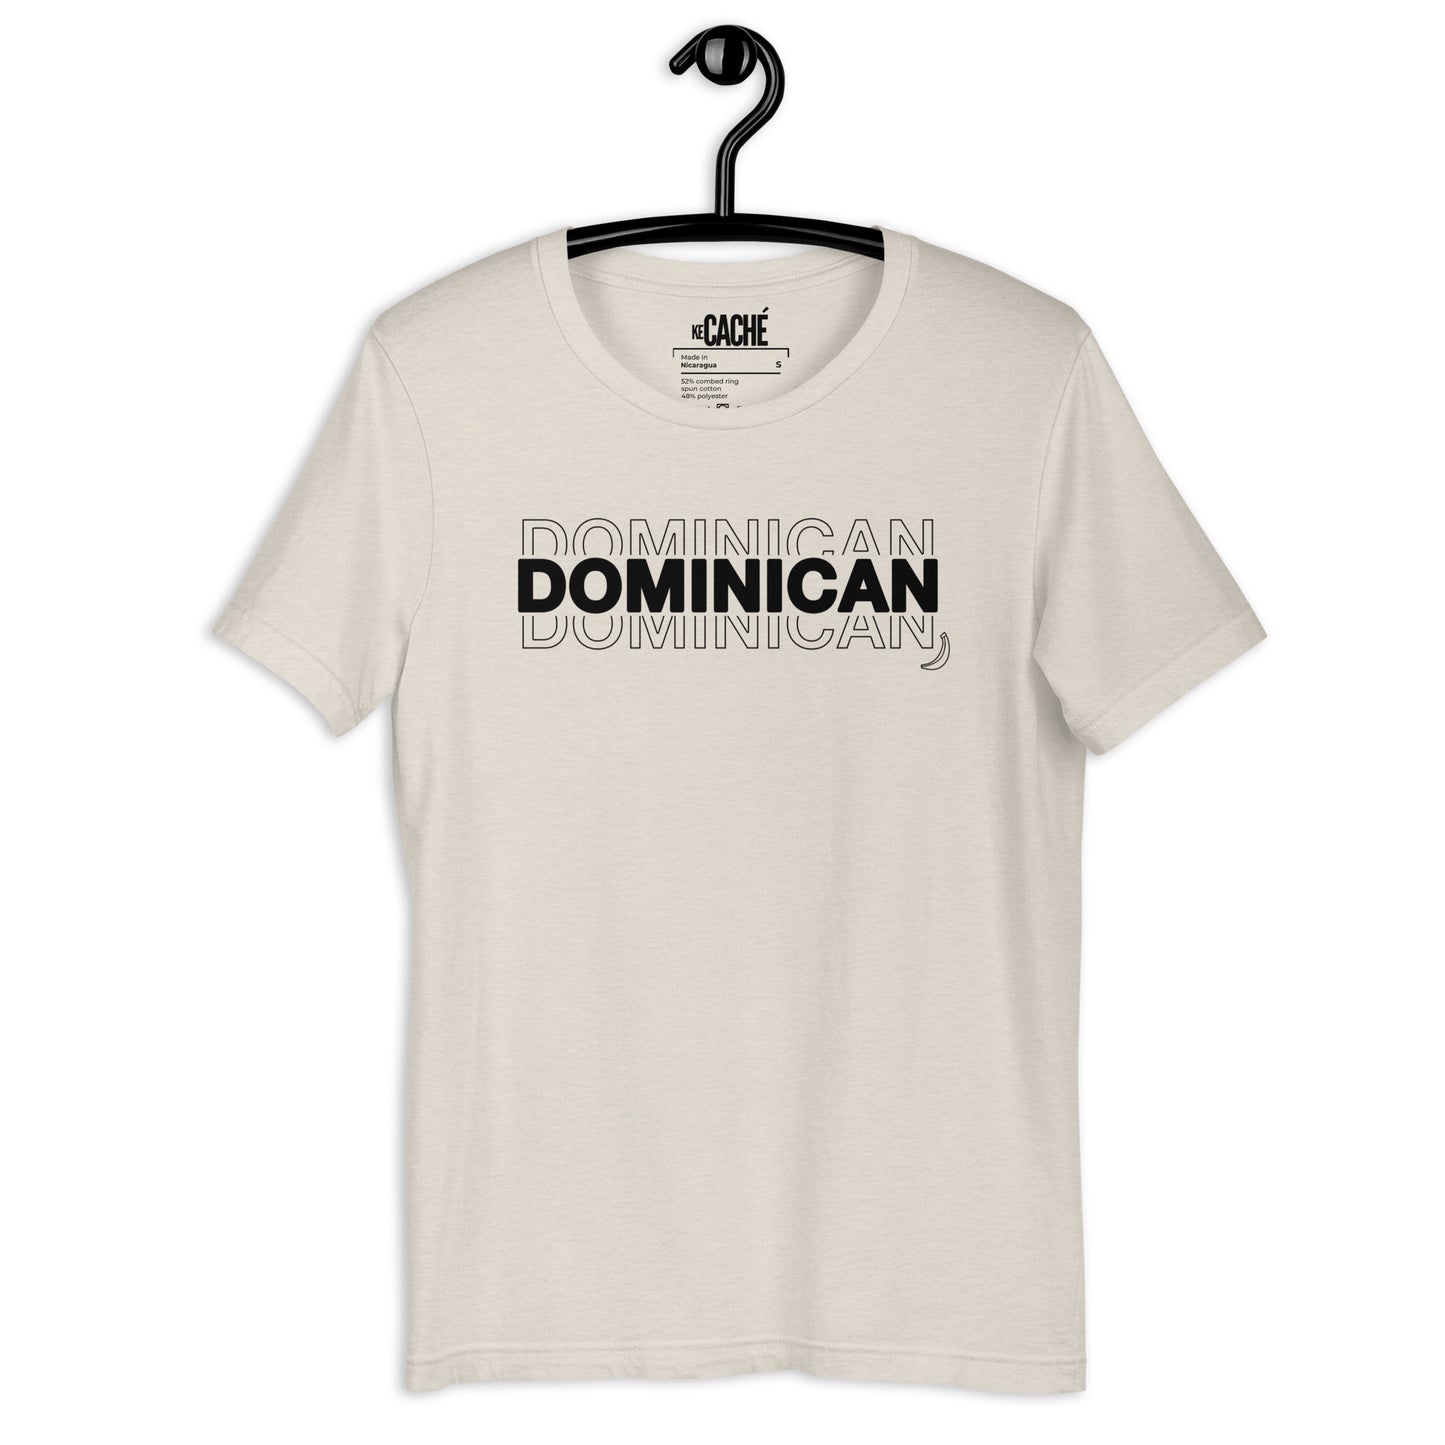 KeCaché Minimalist 'Dominican' T-Shirt - Proudly Represent Your Heritage